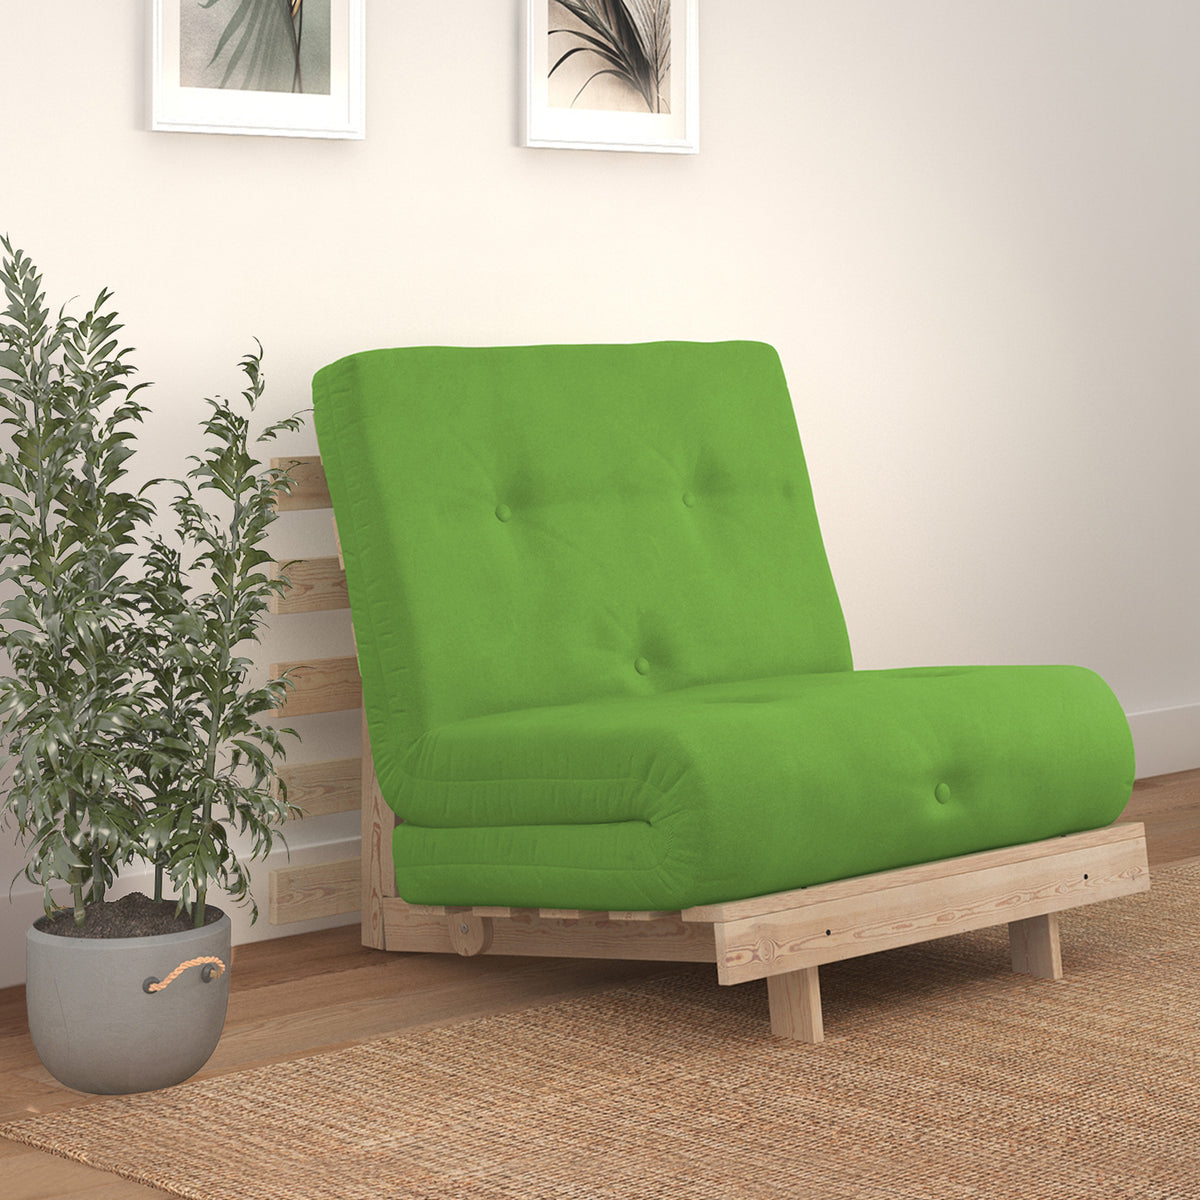 Maggie Apple Green Single Futon Sofa Bed for living room